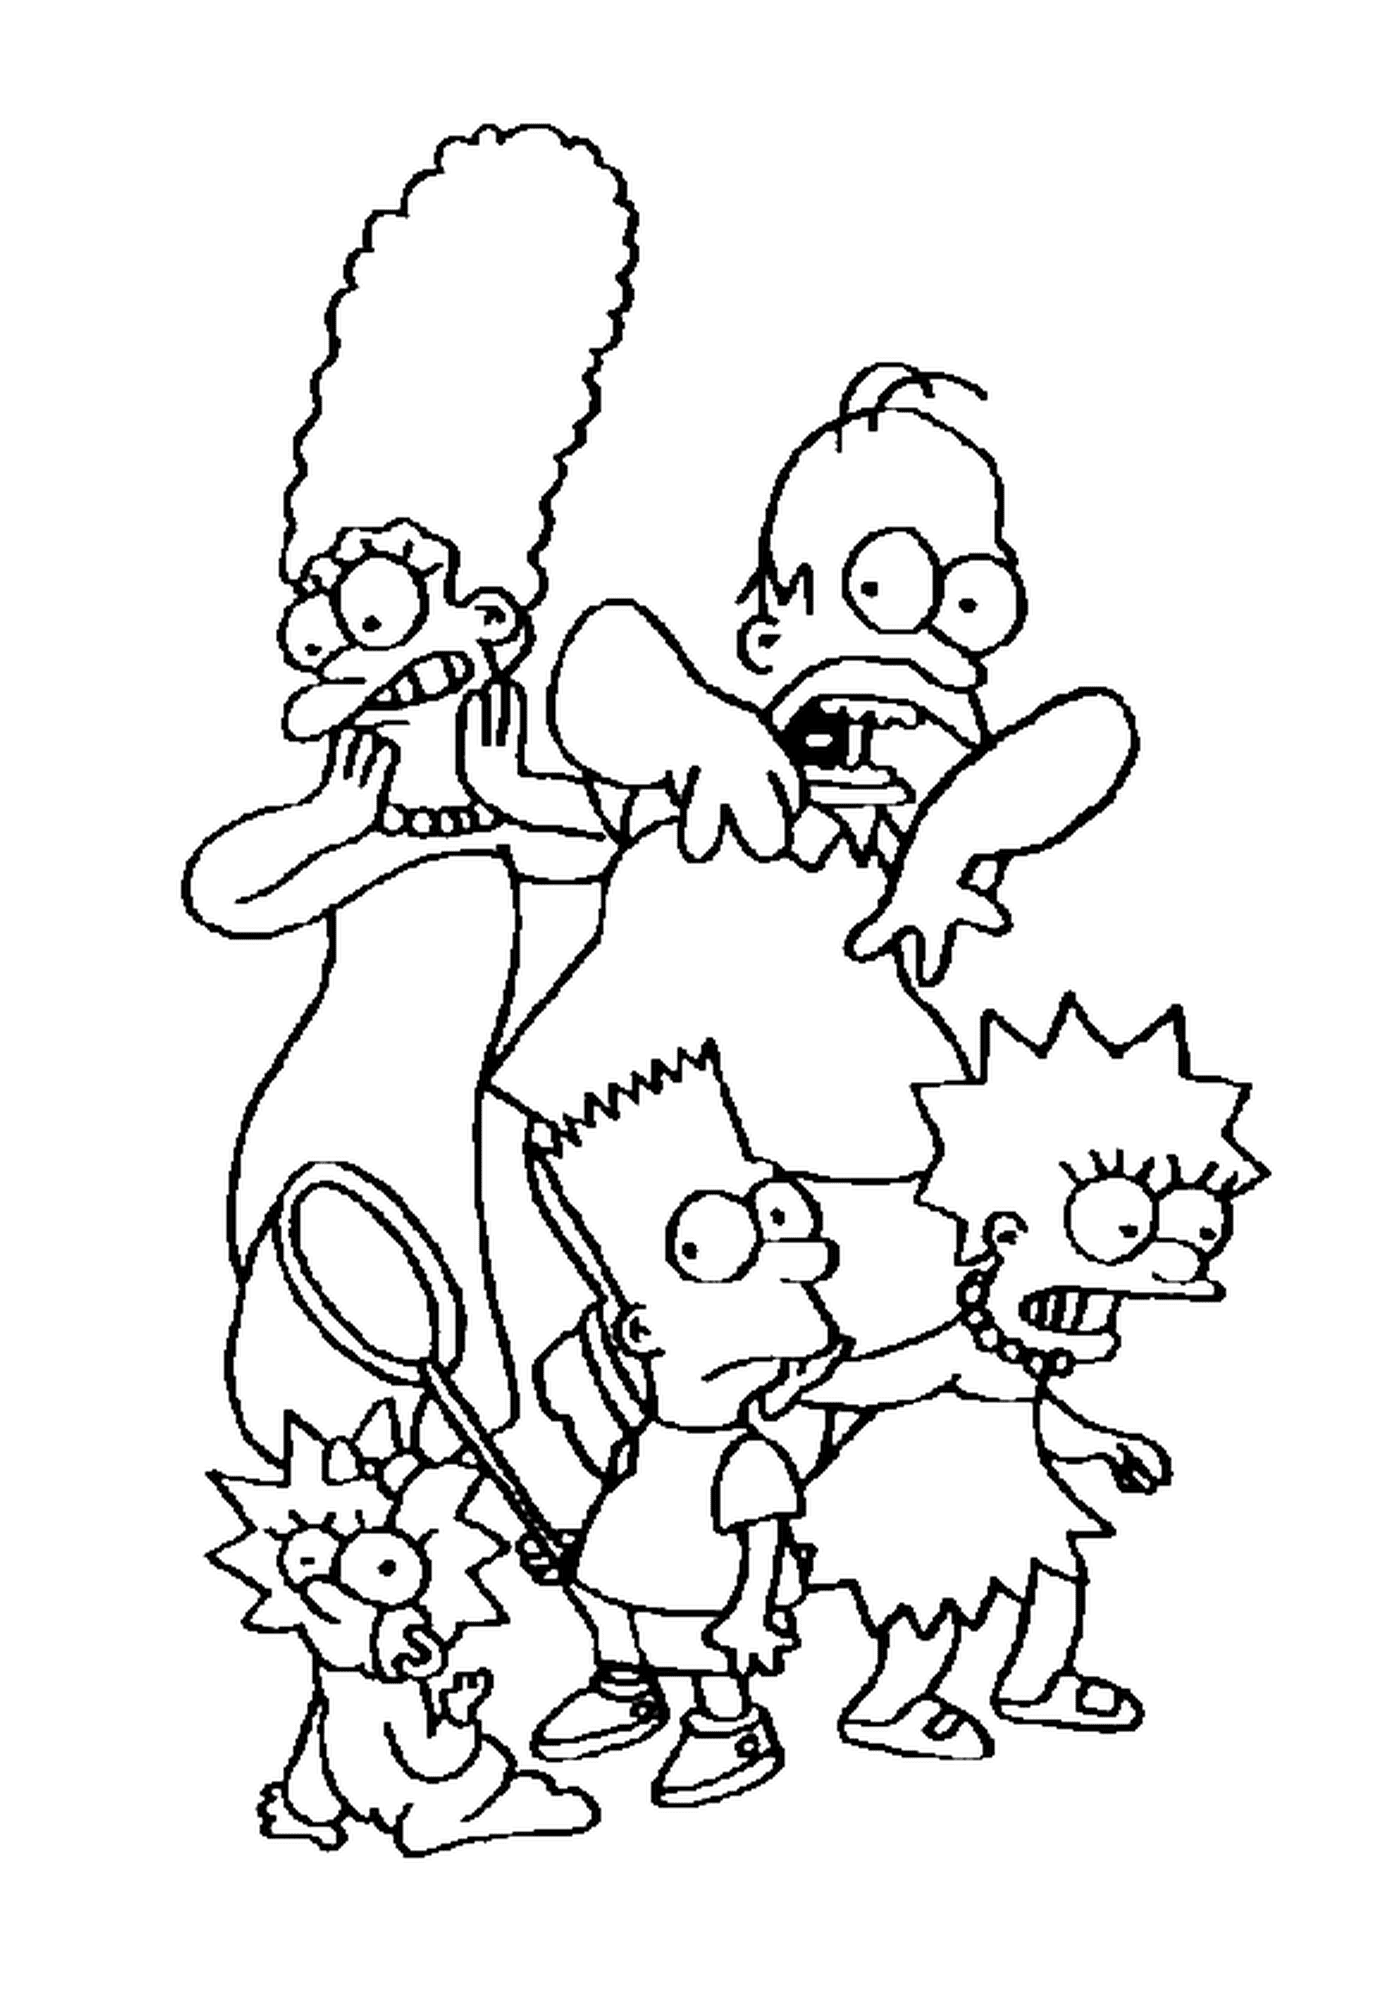  The scared Simpson family, cartoon characters 